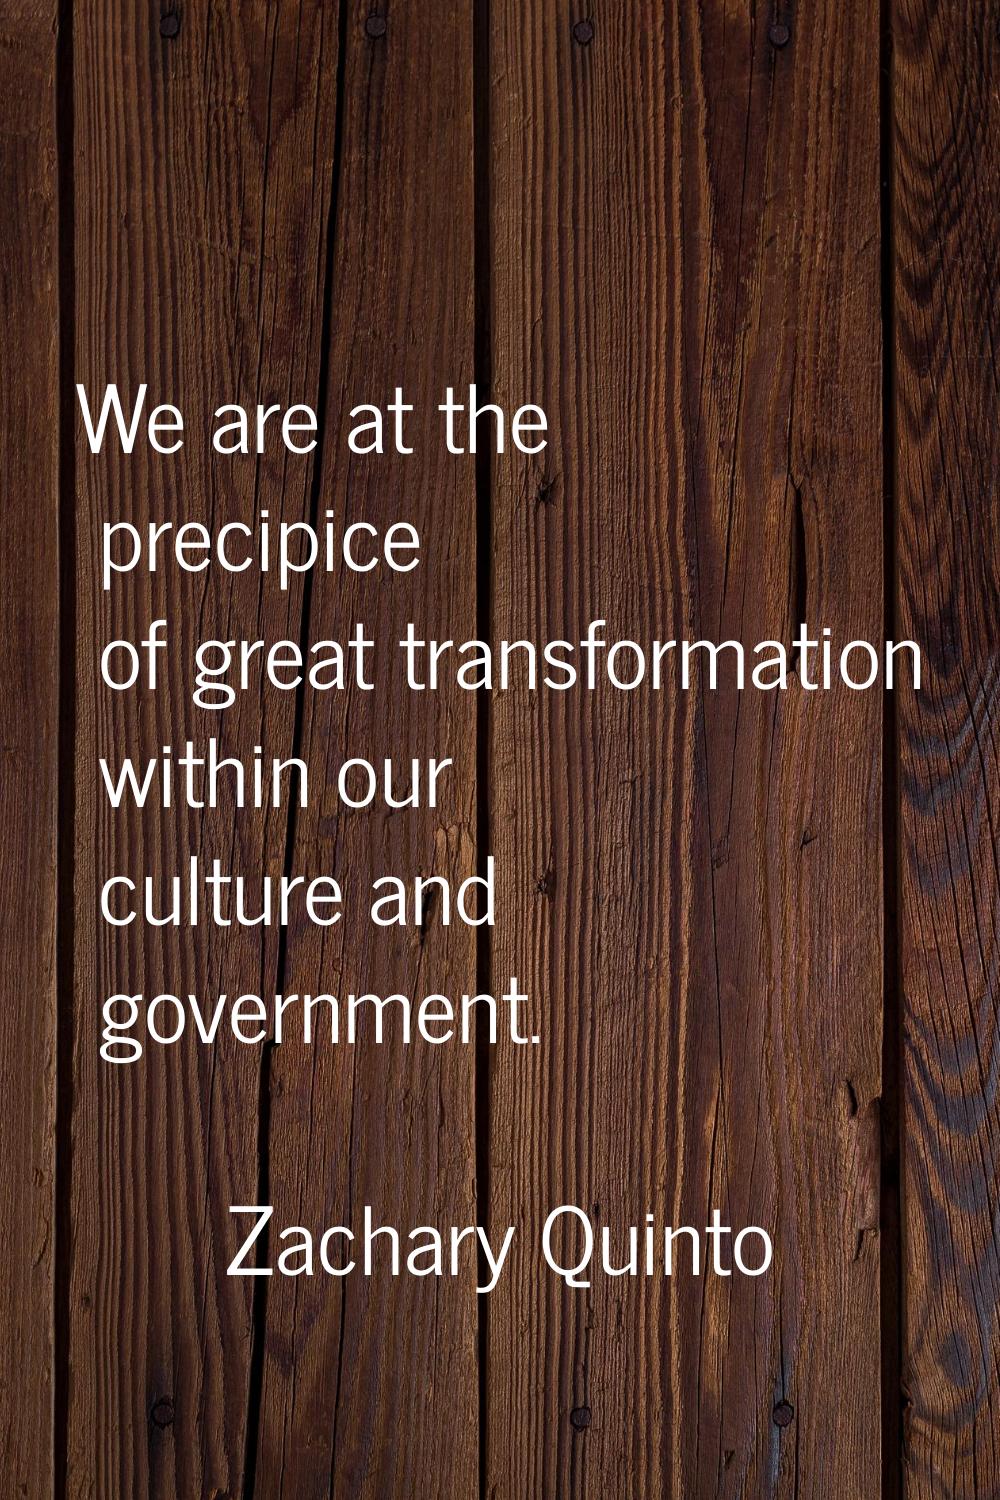 We are at the precipice of great transformation within our culture and government.